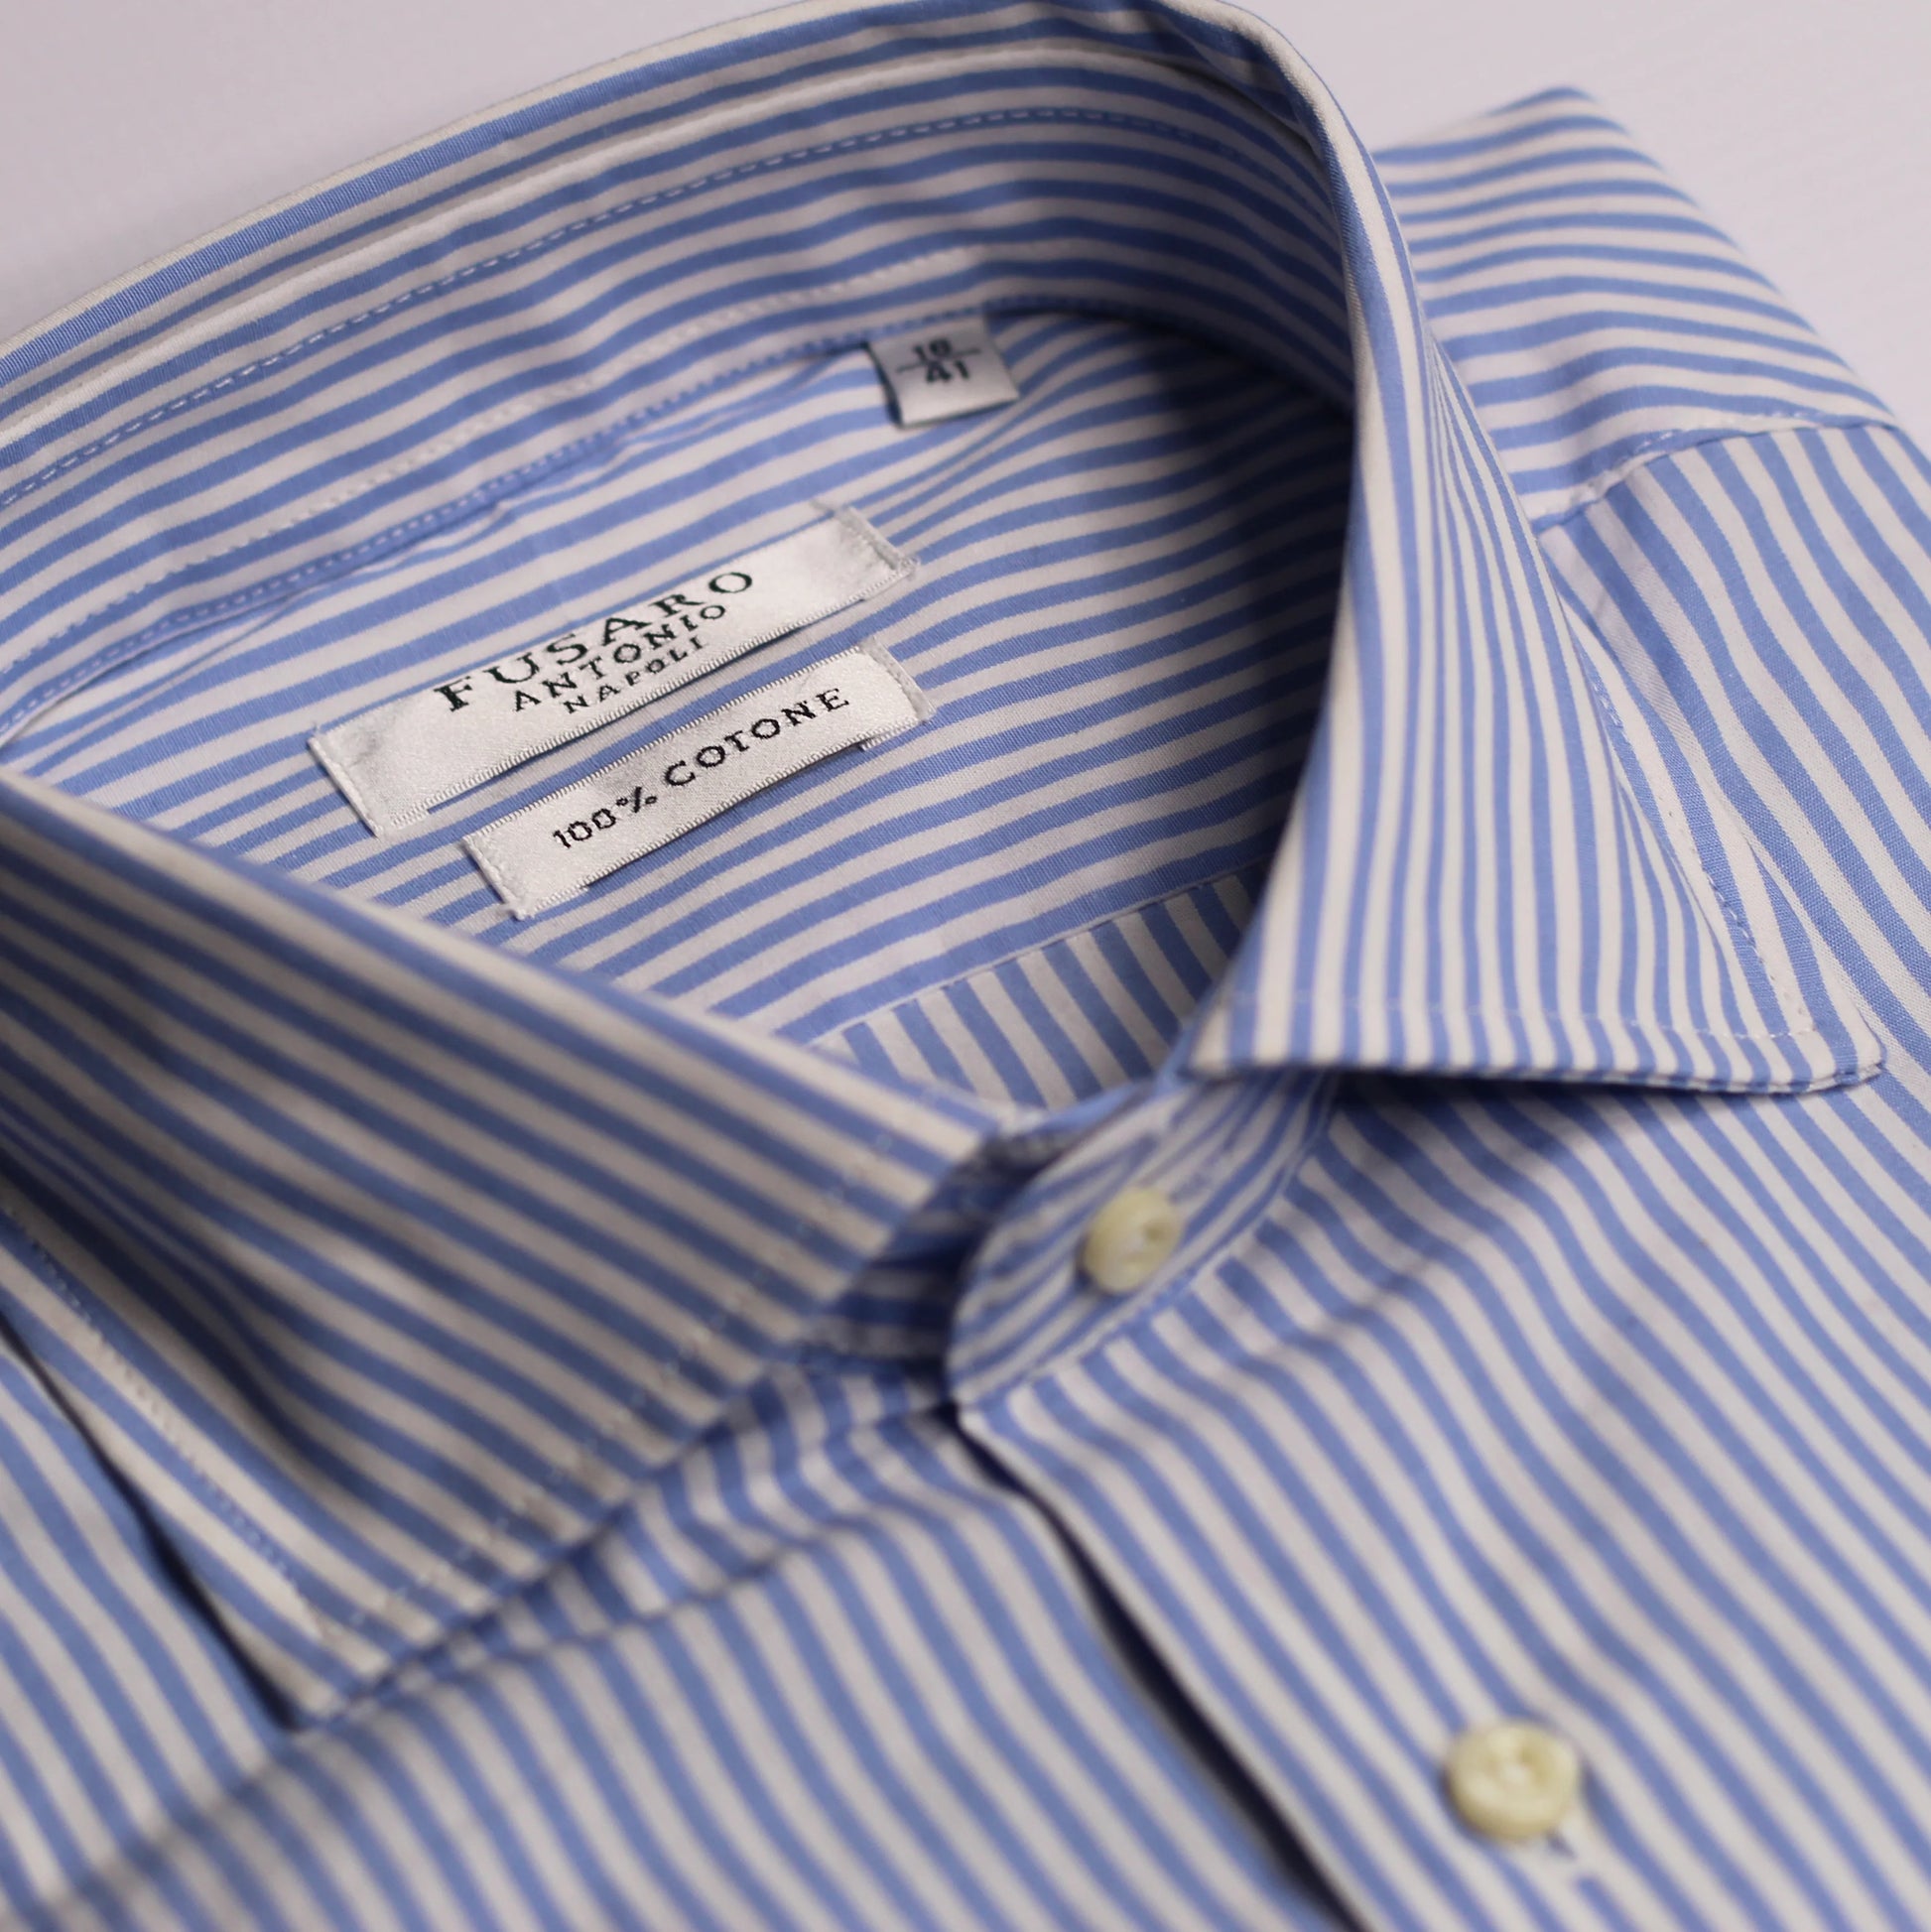 Shop Fusaro Antonio men's Italian shirt in blue stripe (CA20003VAR5) or browse our range of men's Italian clothing and shoes in leather in-store at Aliverti Cape Town, or shop online. We deliver in South Africa & offer multiple payment plans as well as accept multiple safe & secure payment methods.